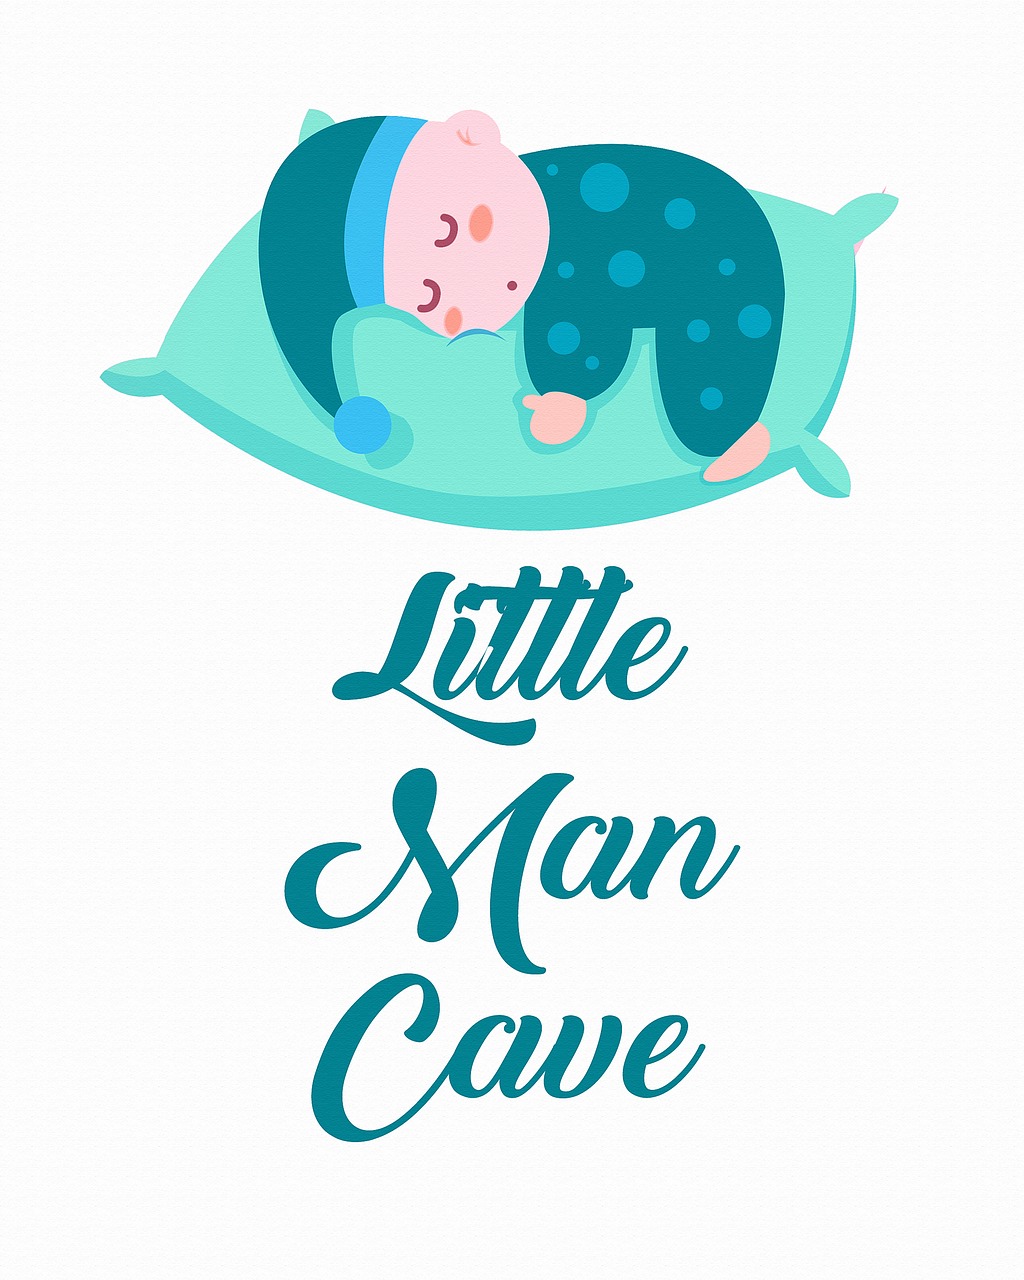 boy's room picture  sleeping baby  little man cave free photo